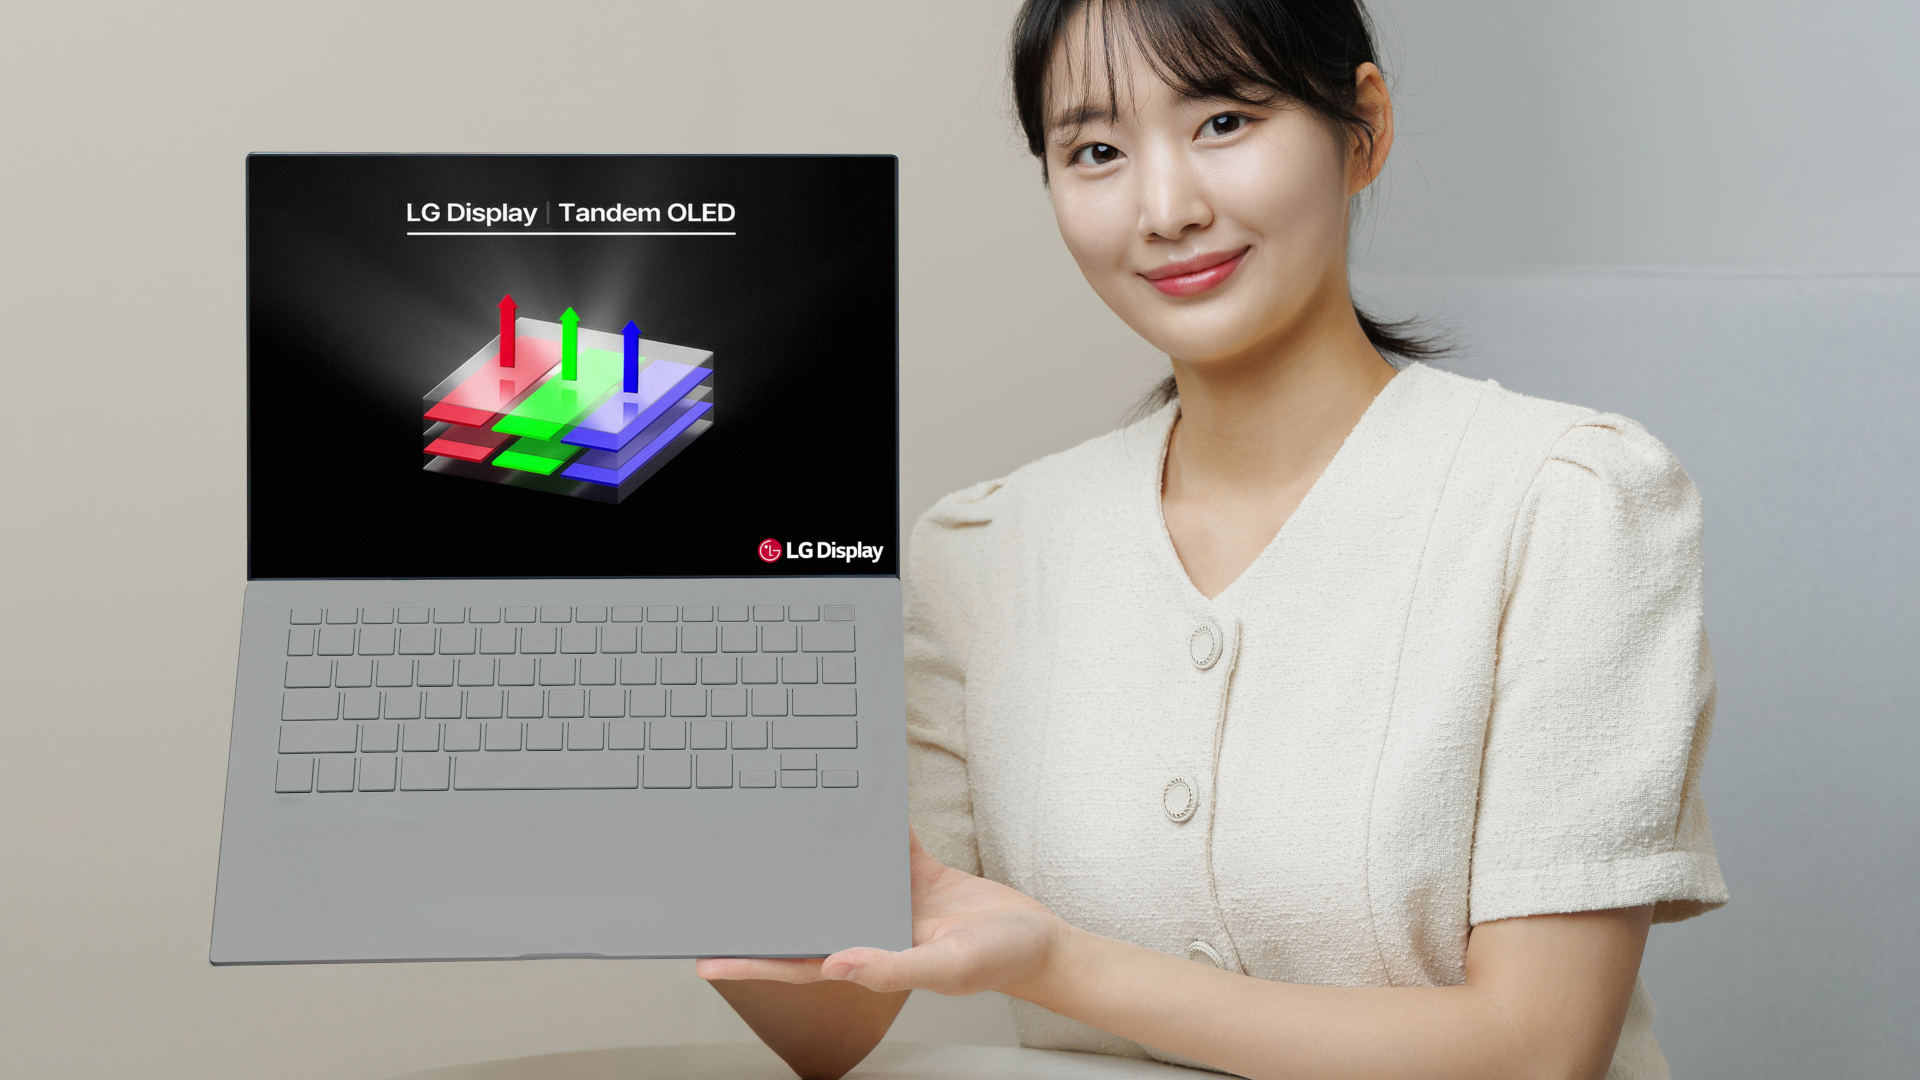  LG brings tandem OLED panels to laptops, claiming three times the brightness and double the lifespan of current self-emissive screens 